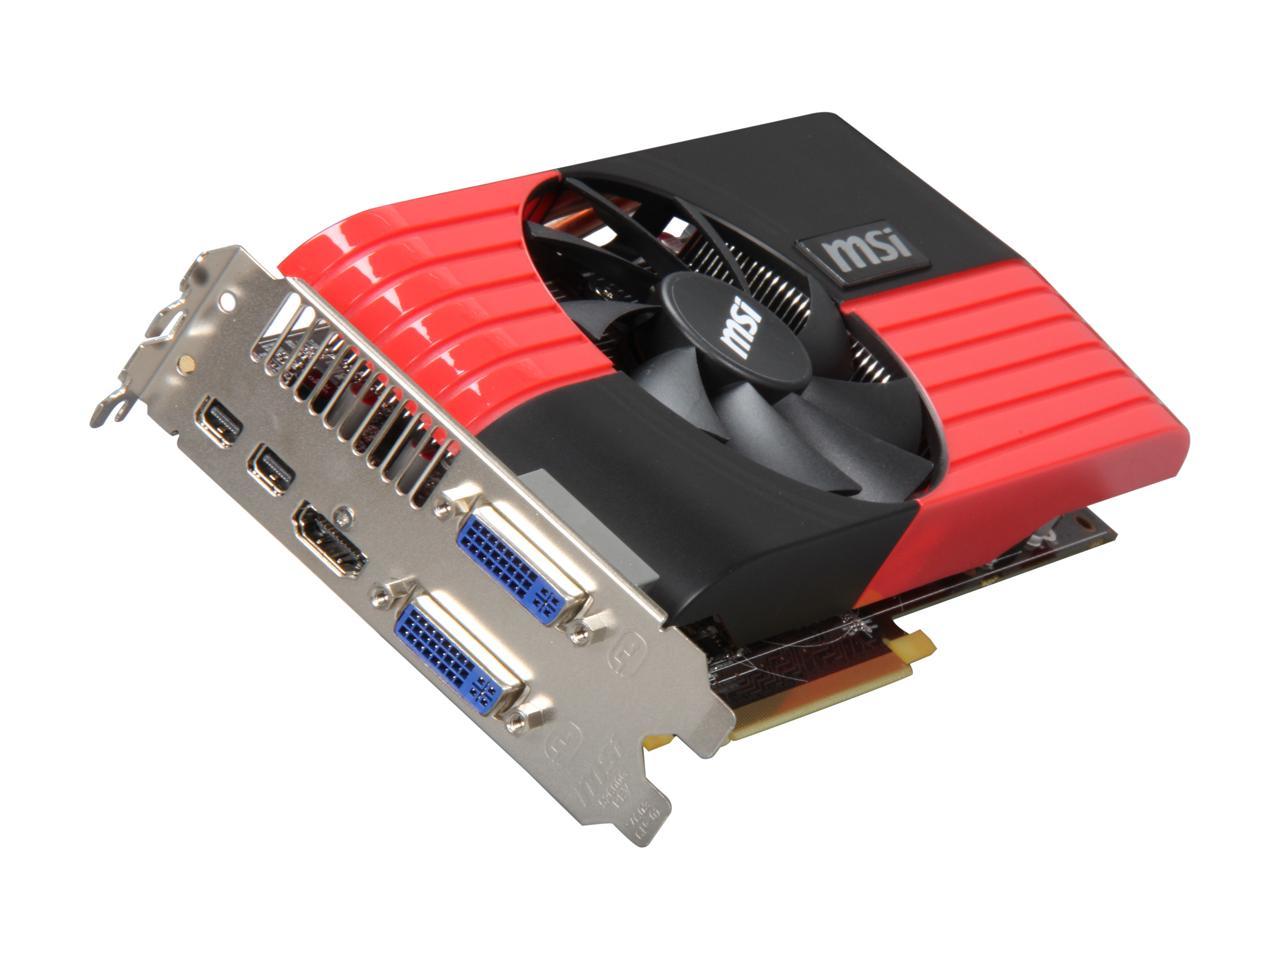 Msi Radeon Hd 6790 Video Card With Eyefinity R6790 2pm2d1gd5 8384